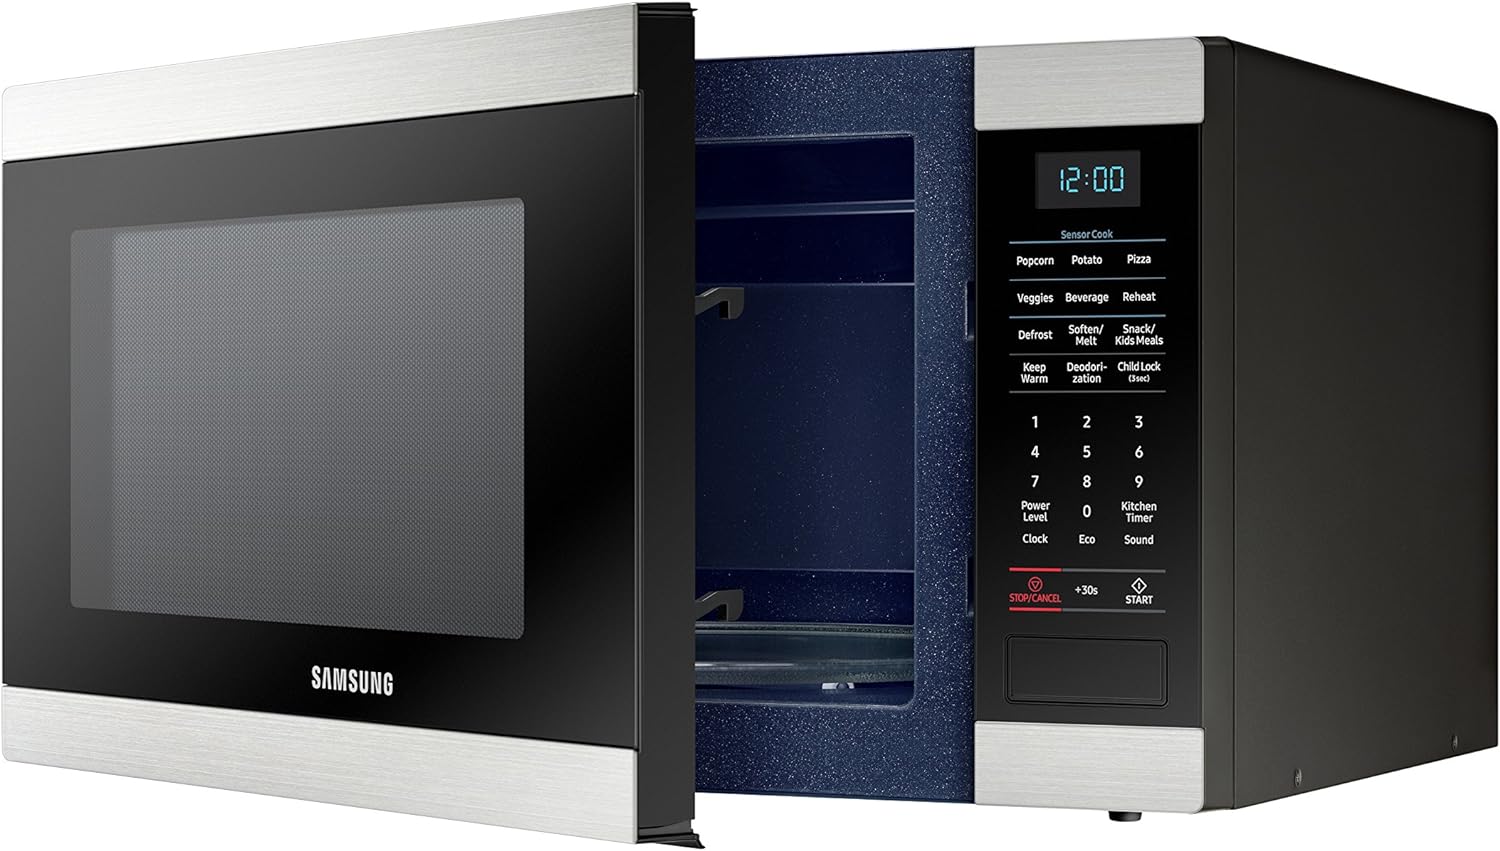 A front-opening microwave oven